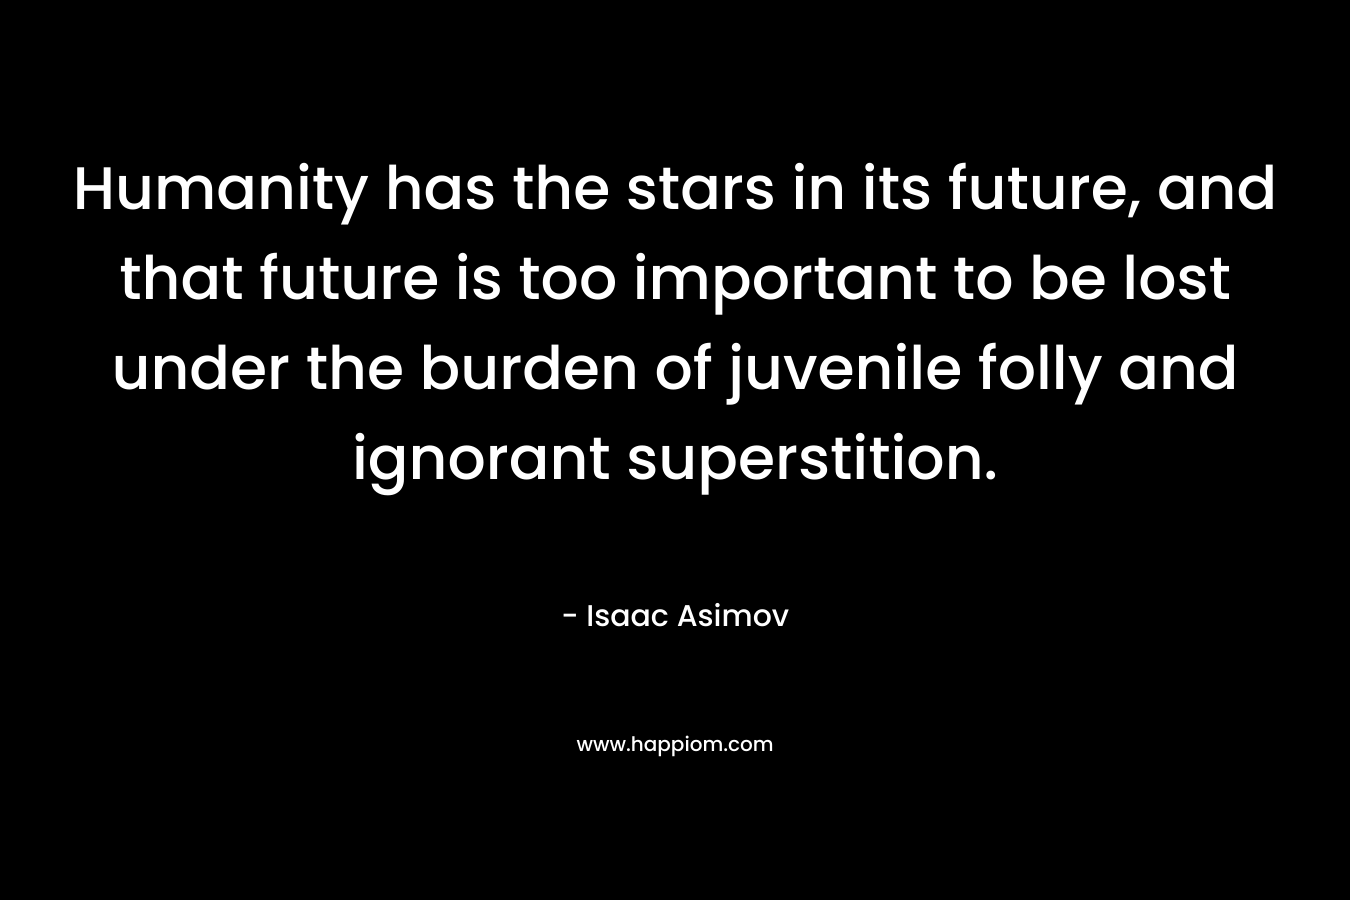 Humanity has the stars in its future, and that future is too important to be lost under the burden of juvenile folly and ignorant superstition.